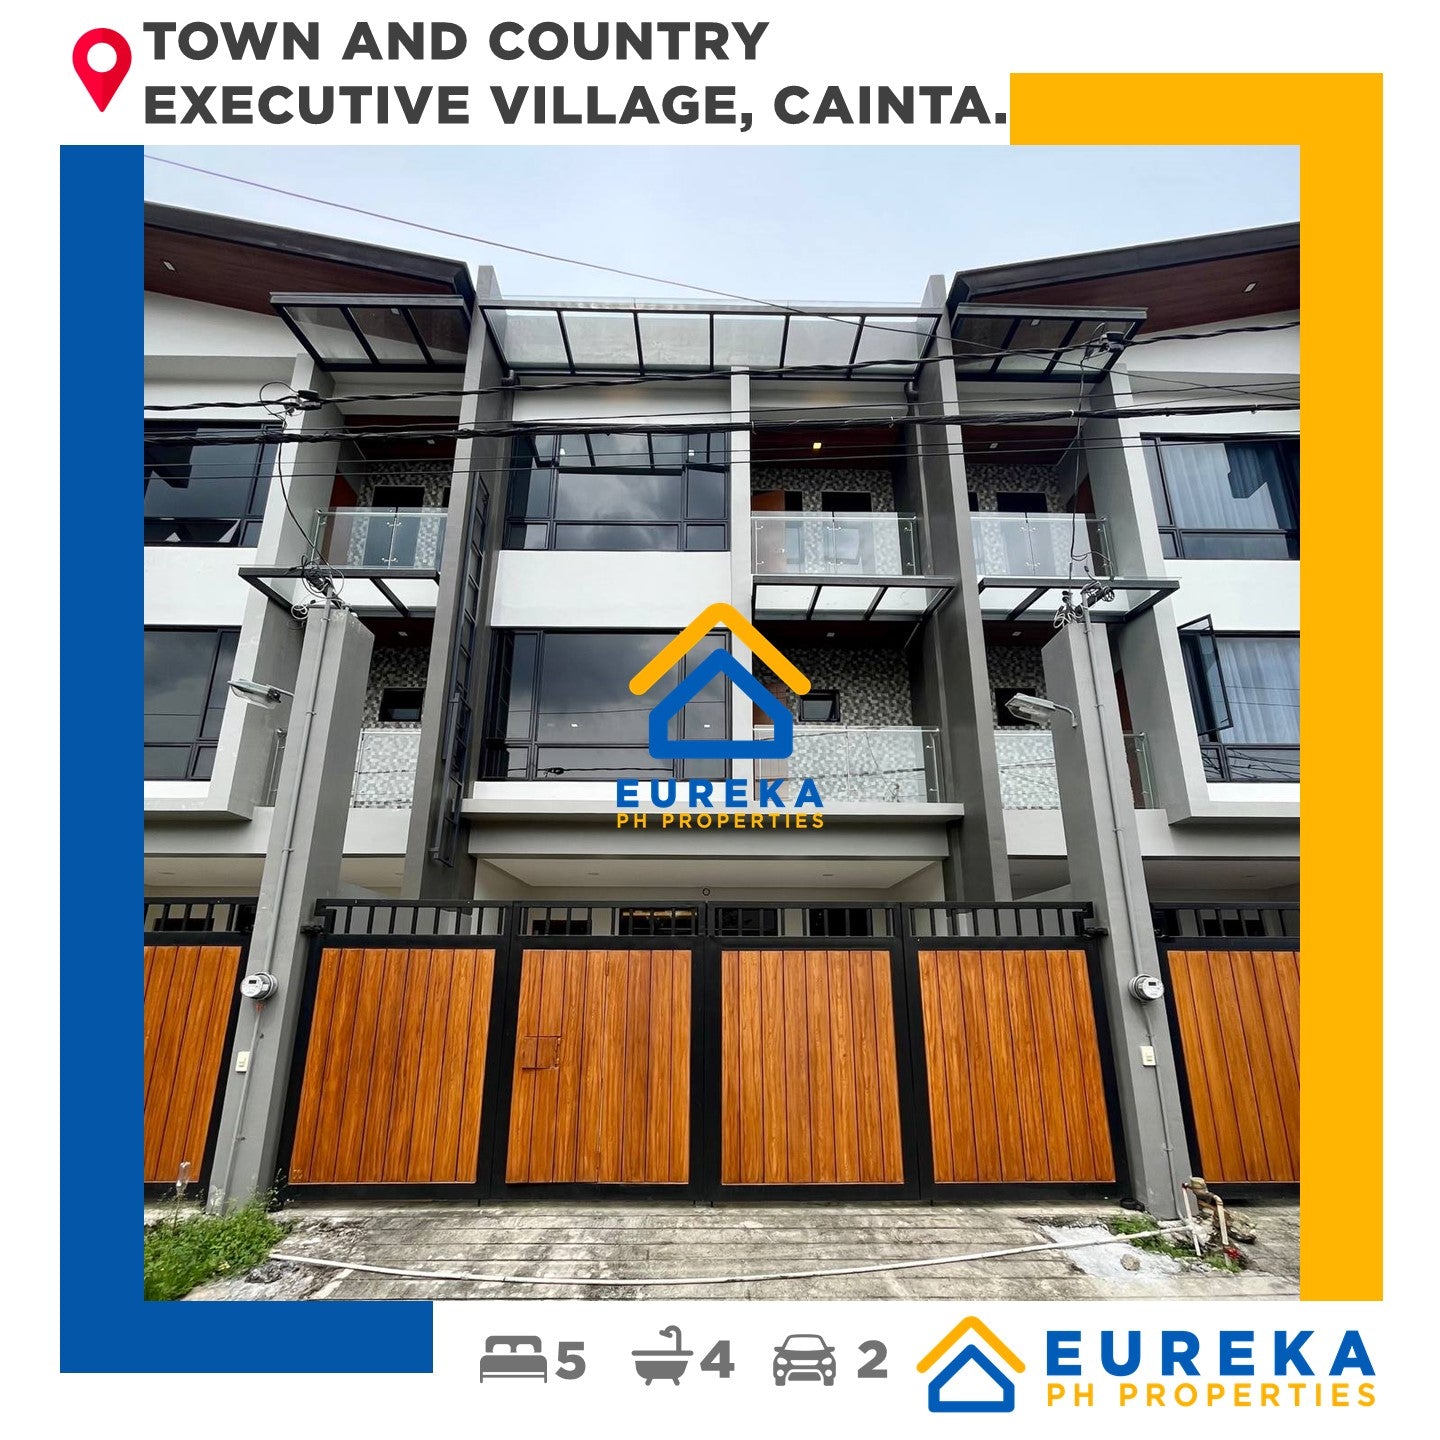 Brand new 3 storey modern townhouse in Town and Country Executive Village, Cainta Rizal.